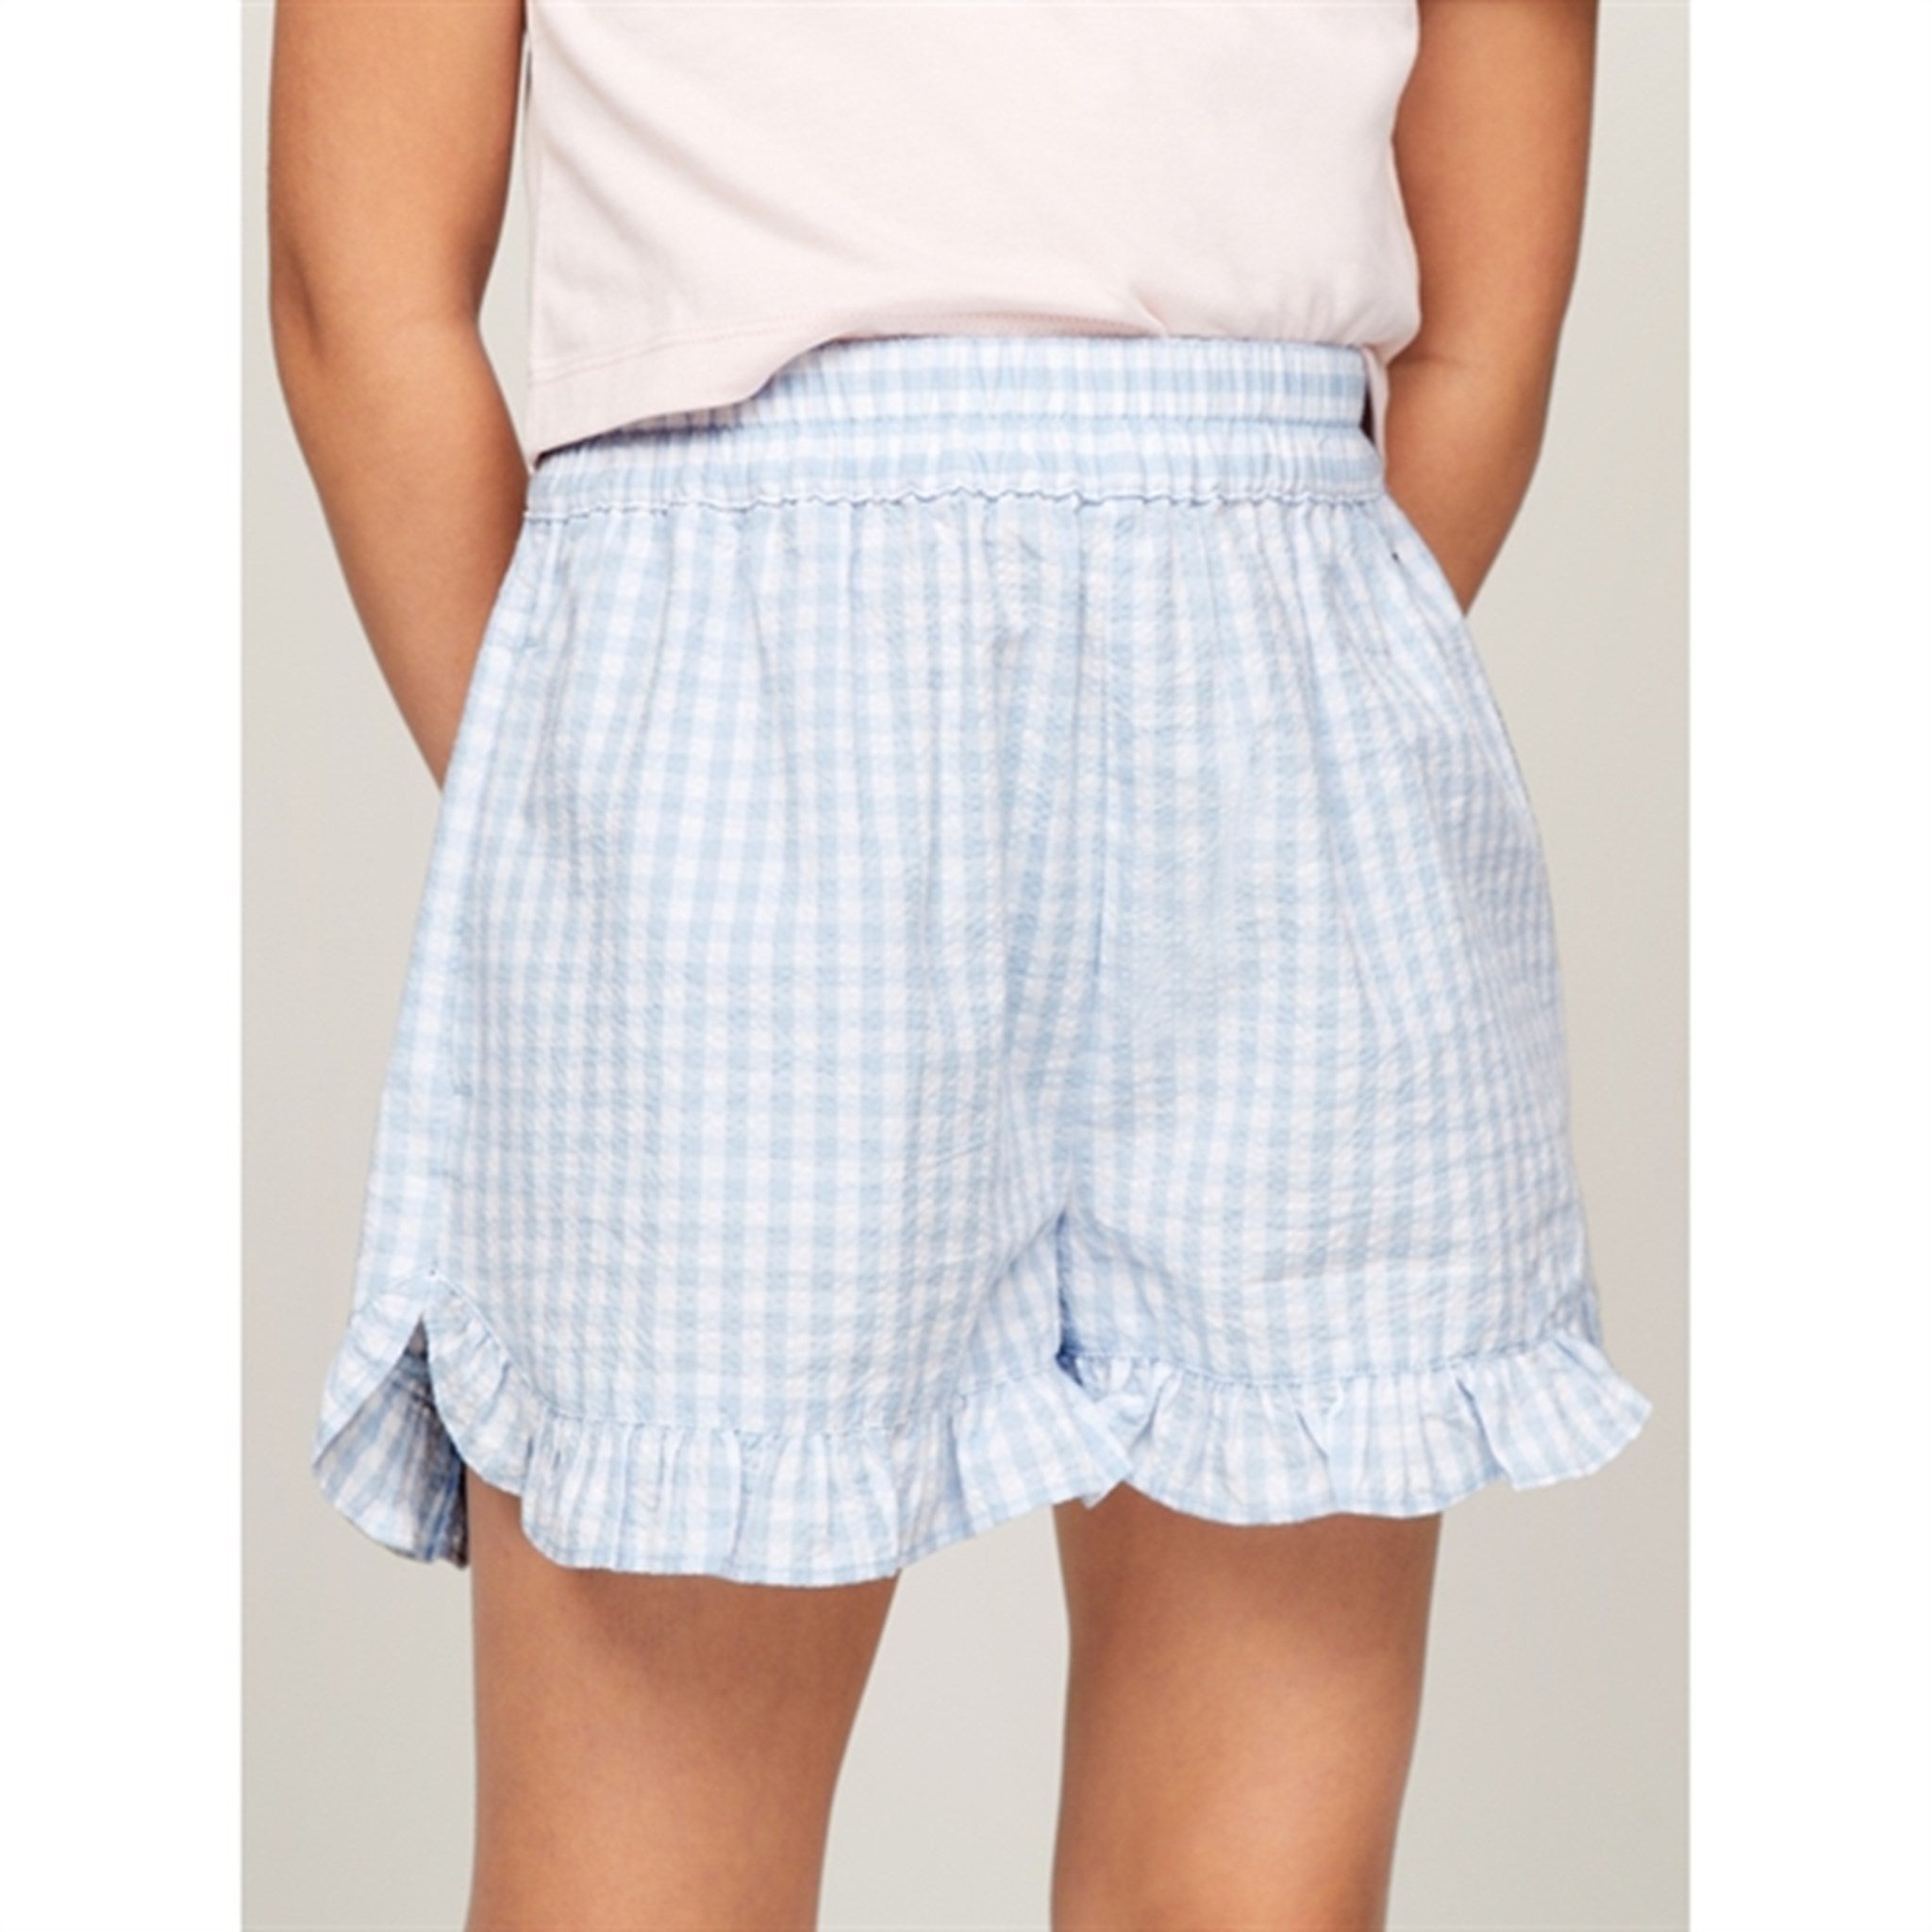 Tommy Hilfiger Gingham Ruffle Shorts Breezy Blue Check